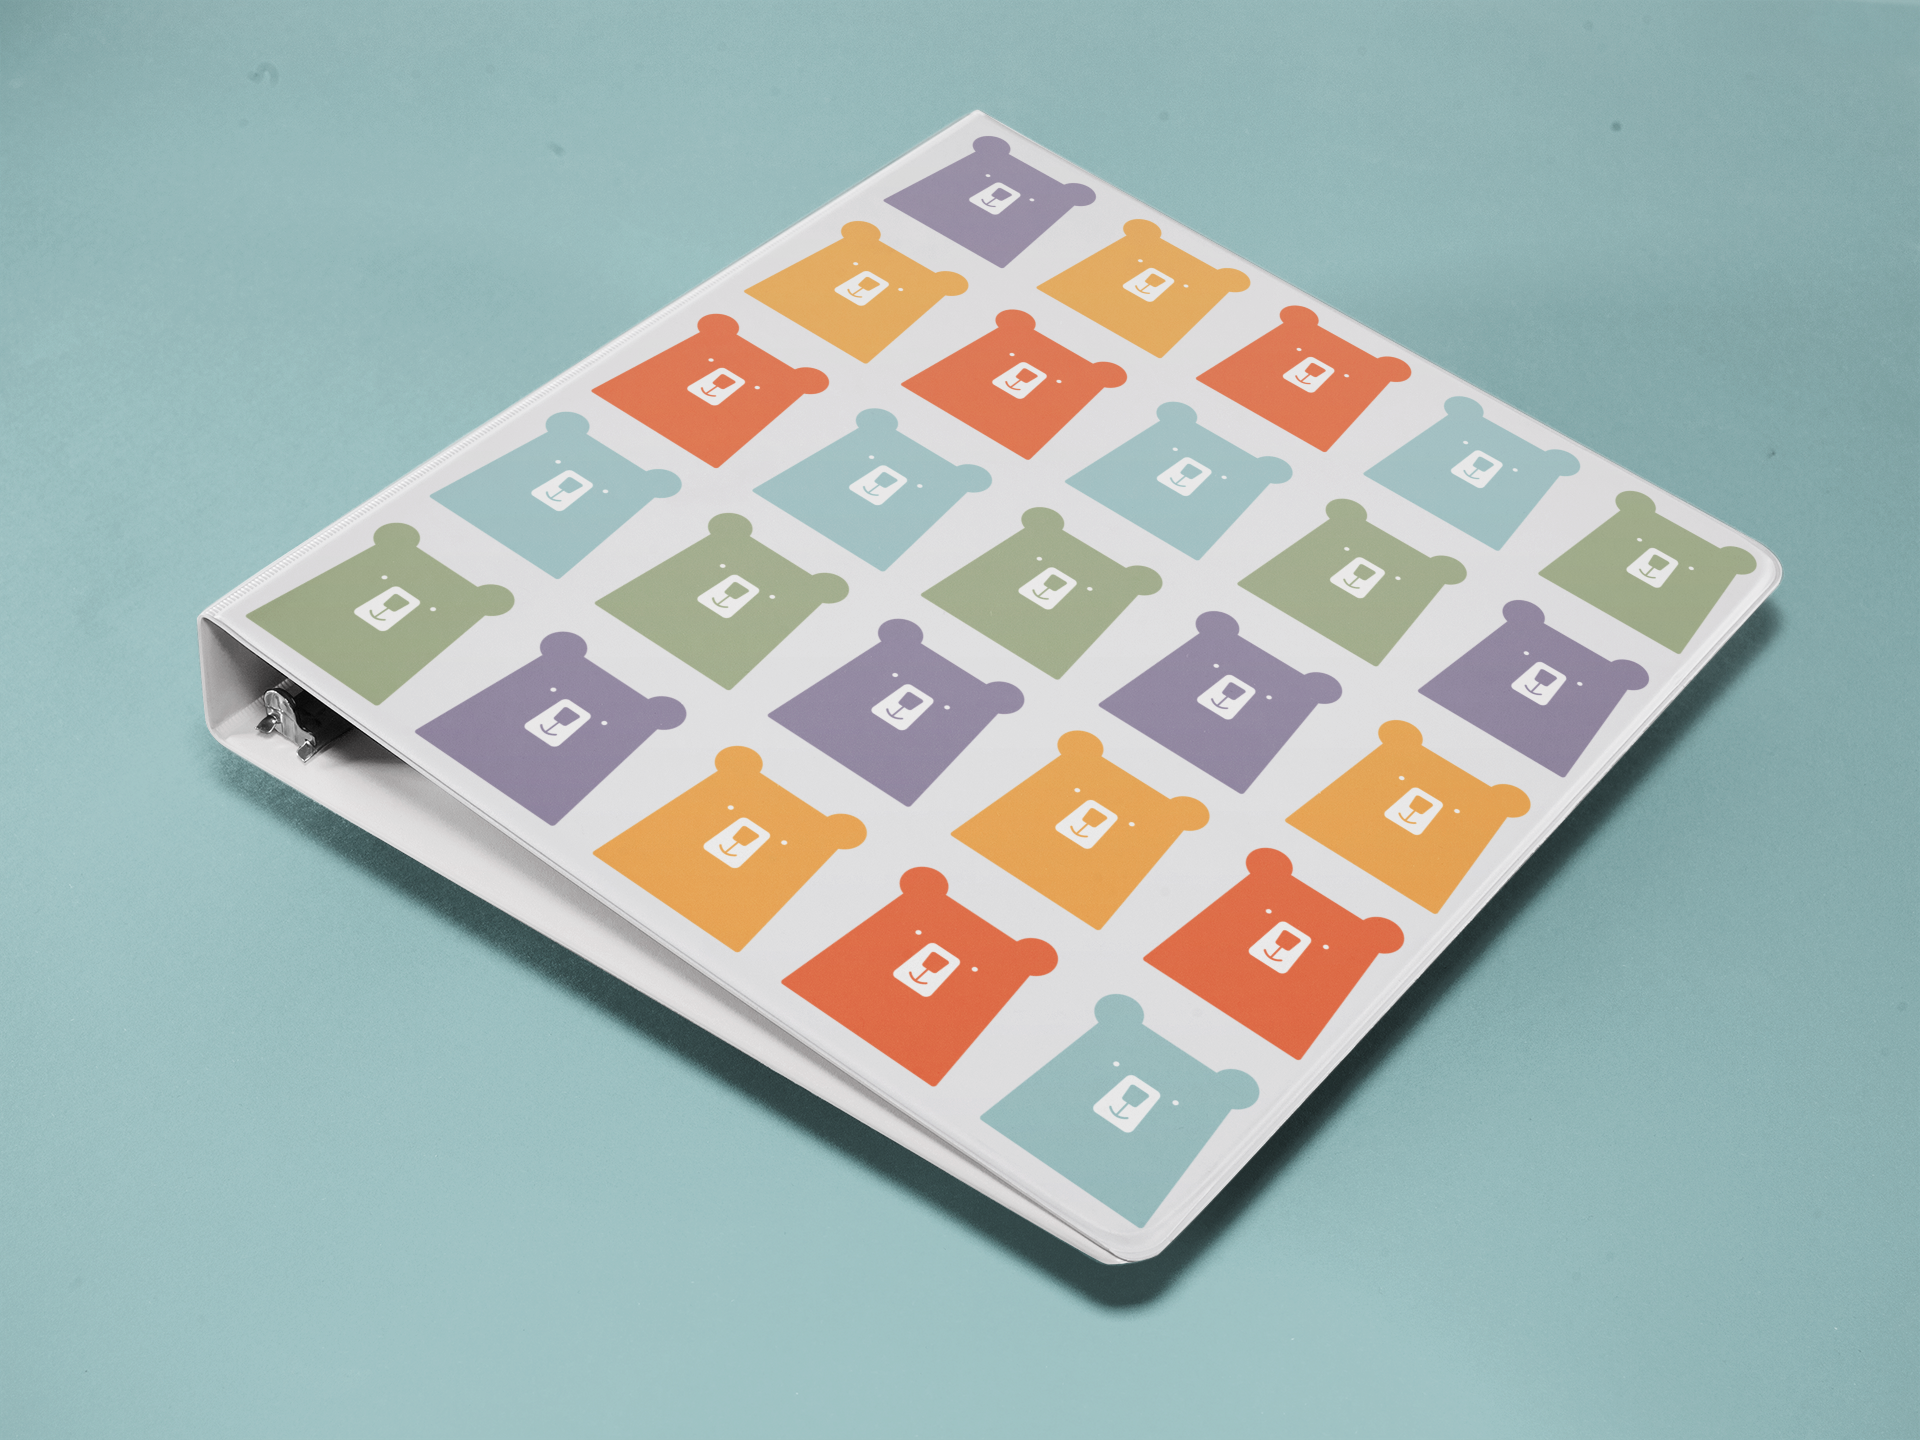 binder-mockup-lying-on-a-solid-surface-a15333.png